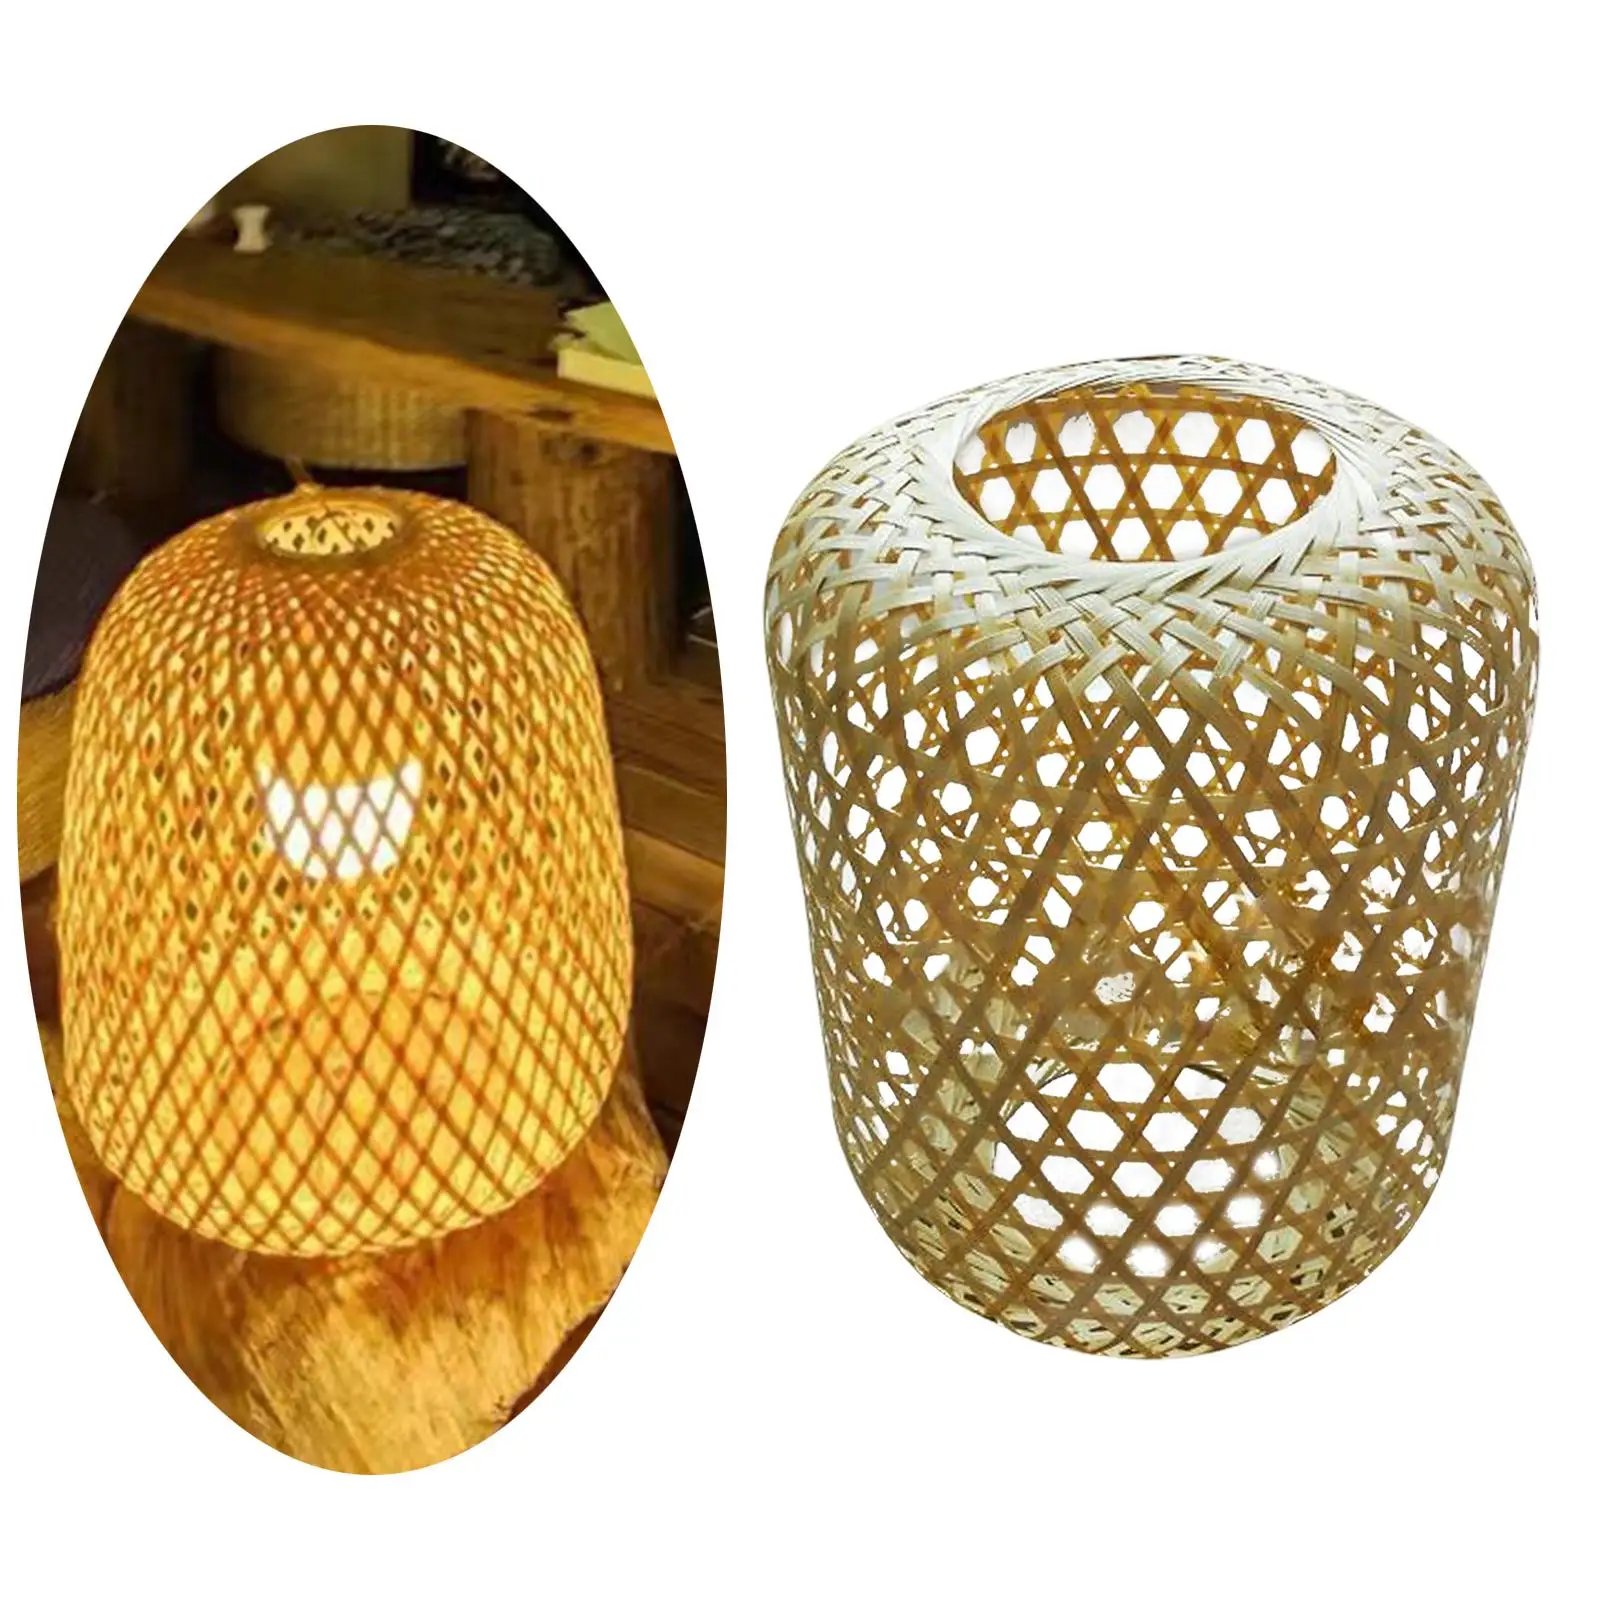 2xHandwoven Bamboo Lamp Shade Ceiling Light Fixture Cover for Pendant Light